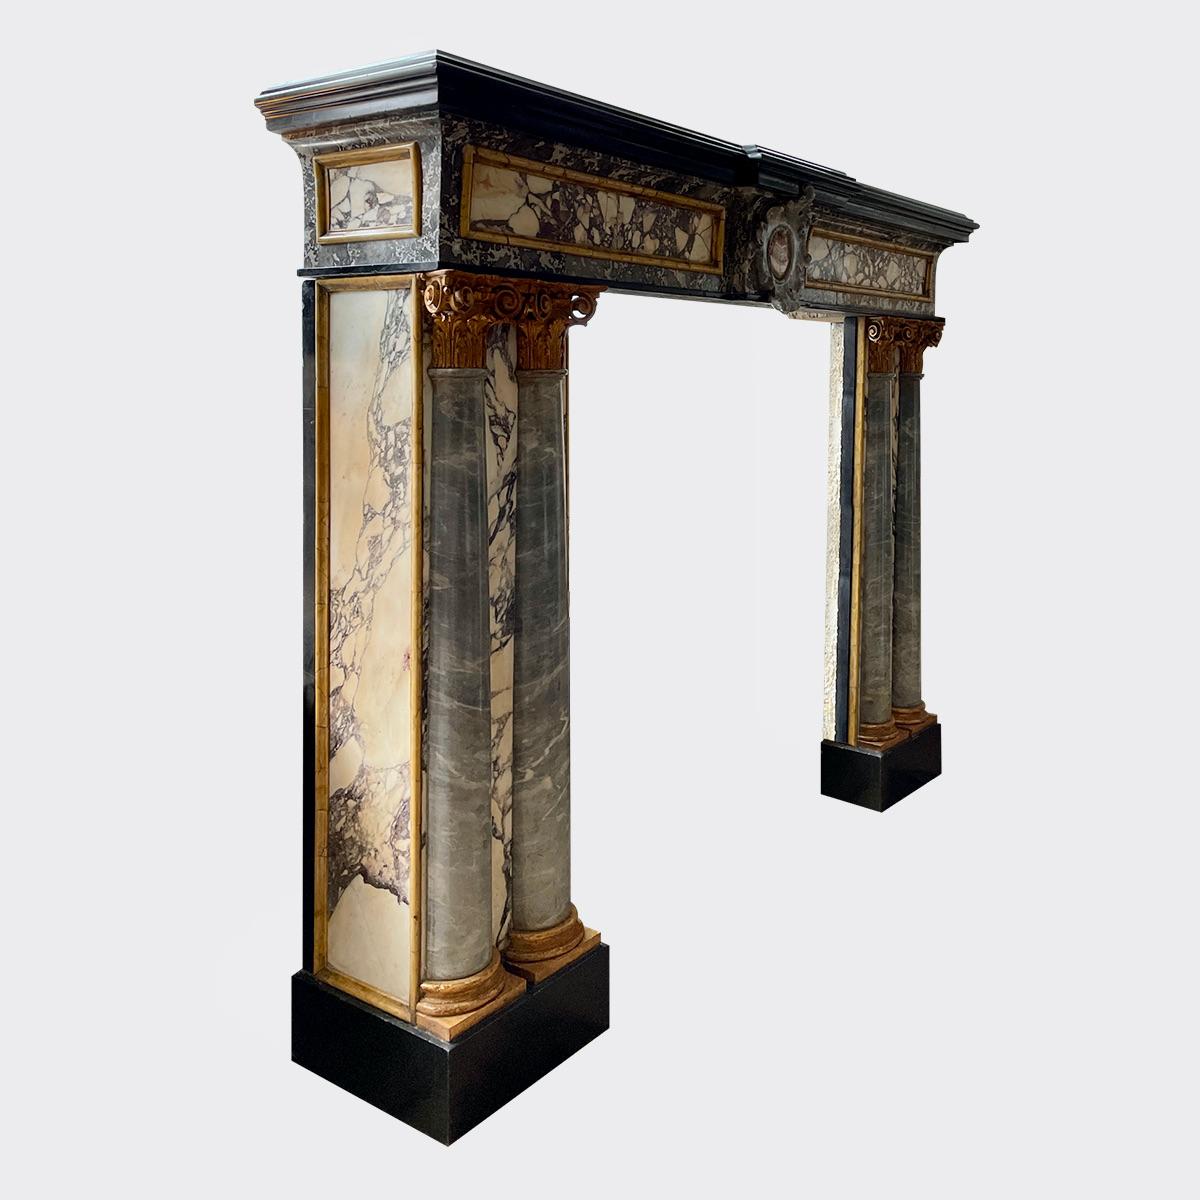 A rare and unusual 19th century Italian Renaissance revival specimen marble chimneypiece of superior quality. The jambs stood on Belgian Black marble foot blocks with Breche panels to front and side returns, both framed with Siena marble mouldings.